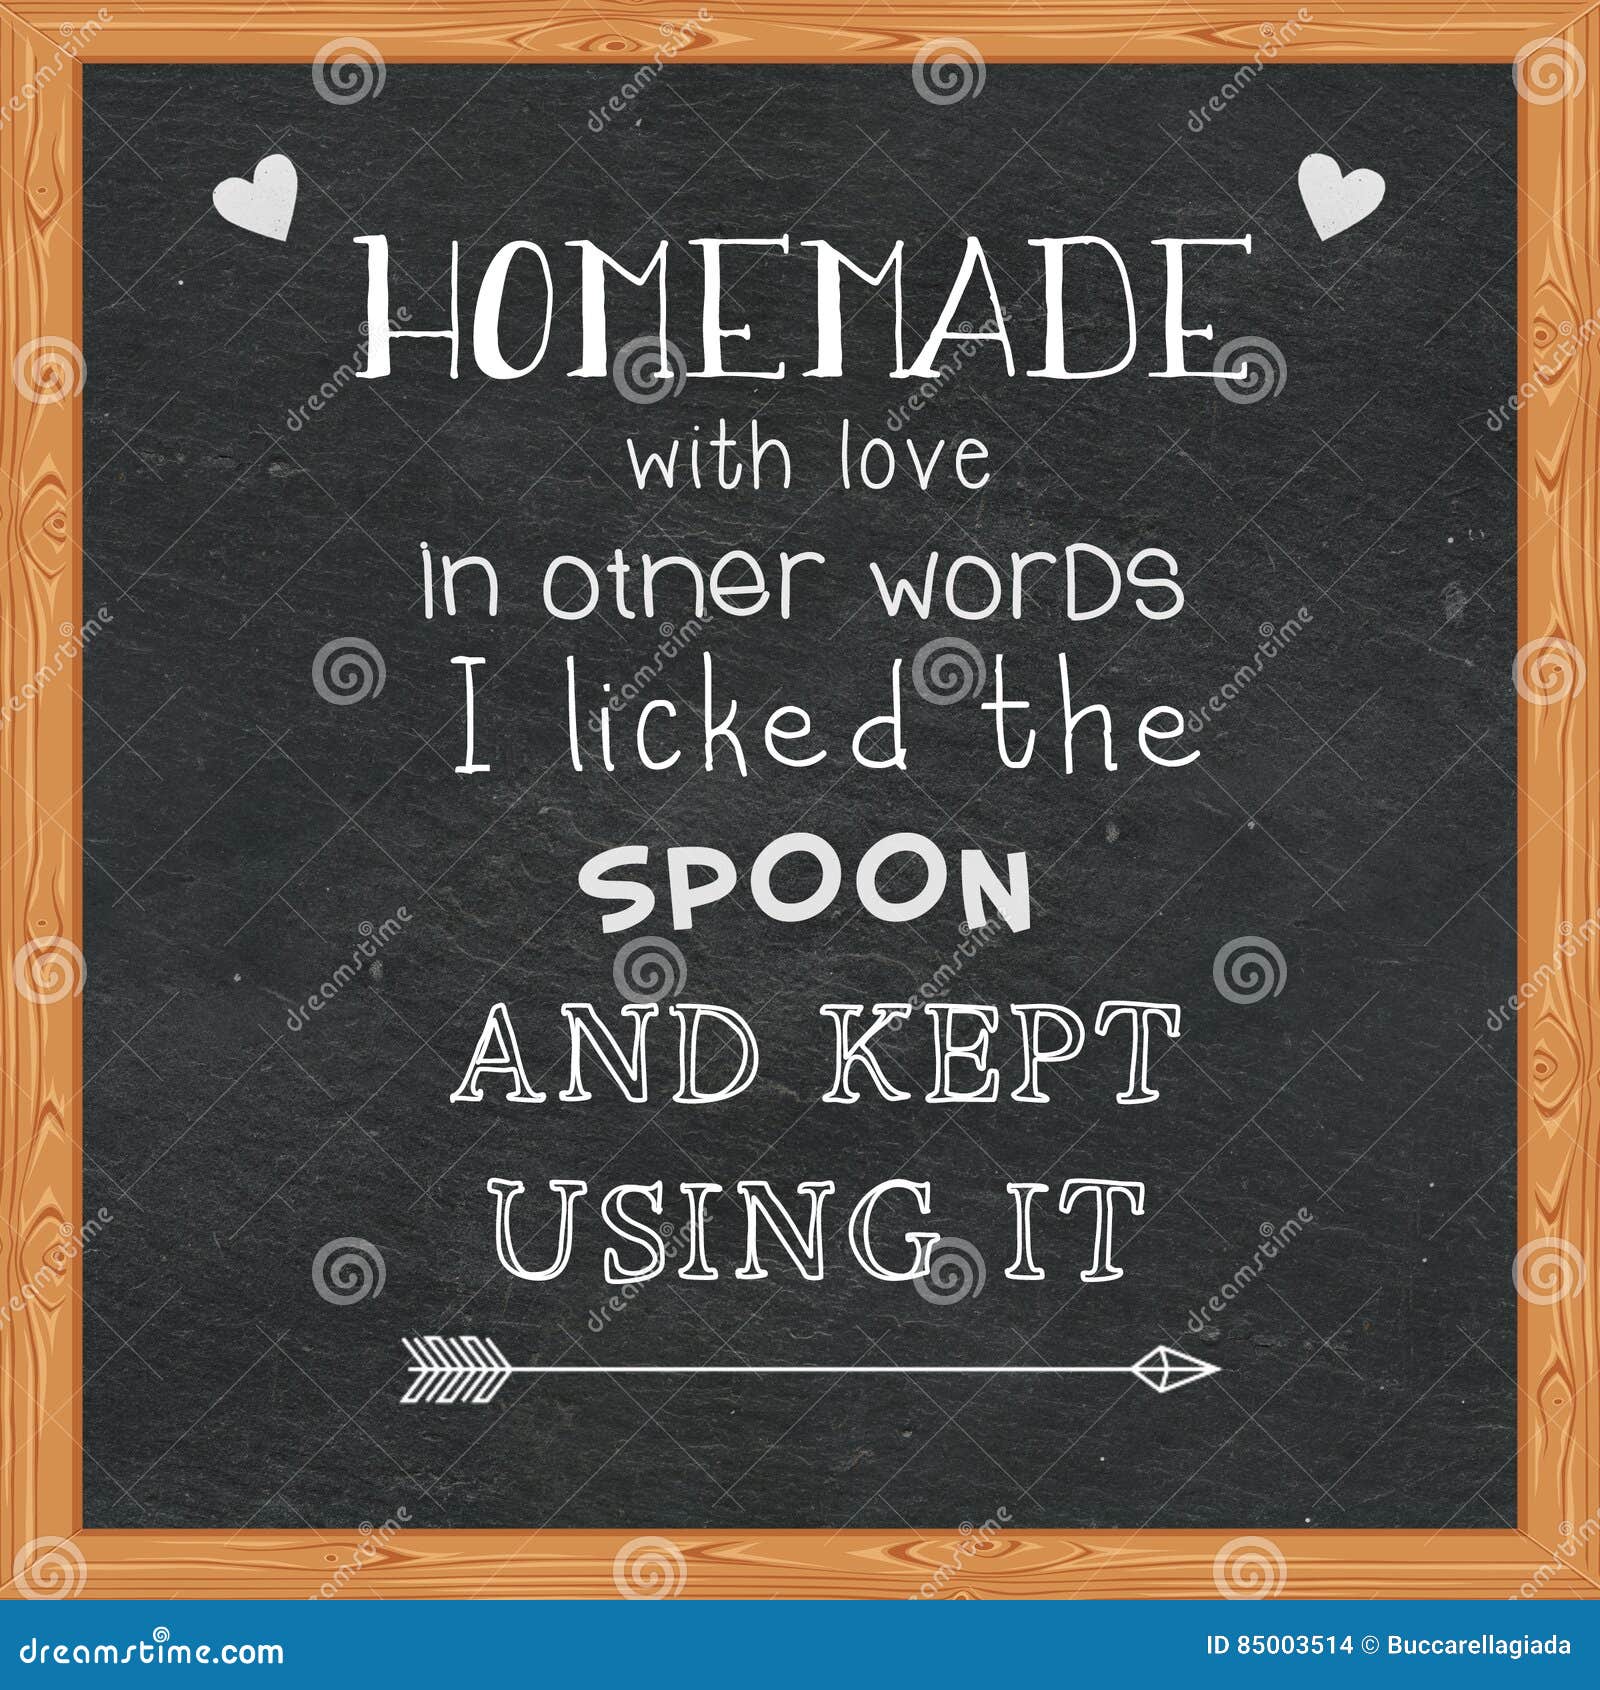 Homemade with Love in Other Words I Licked the Spoon and Kept Using it - Funny  Quotes on Chalkboard Stock Illustration - Illustration of chalk,  decorative: 85003514